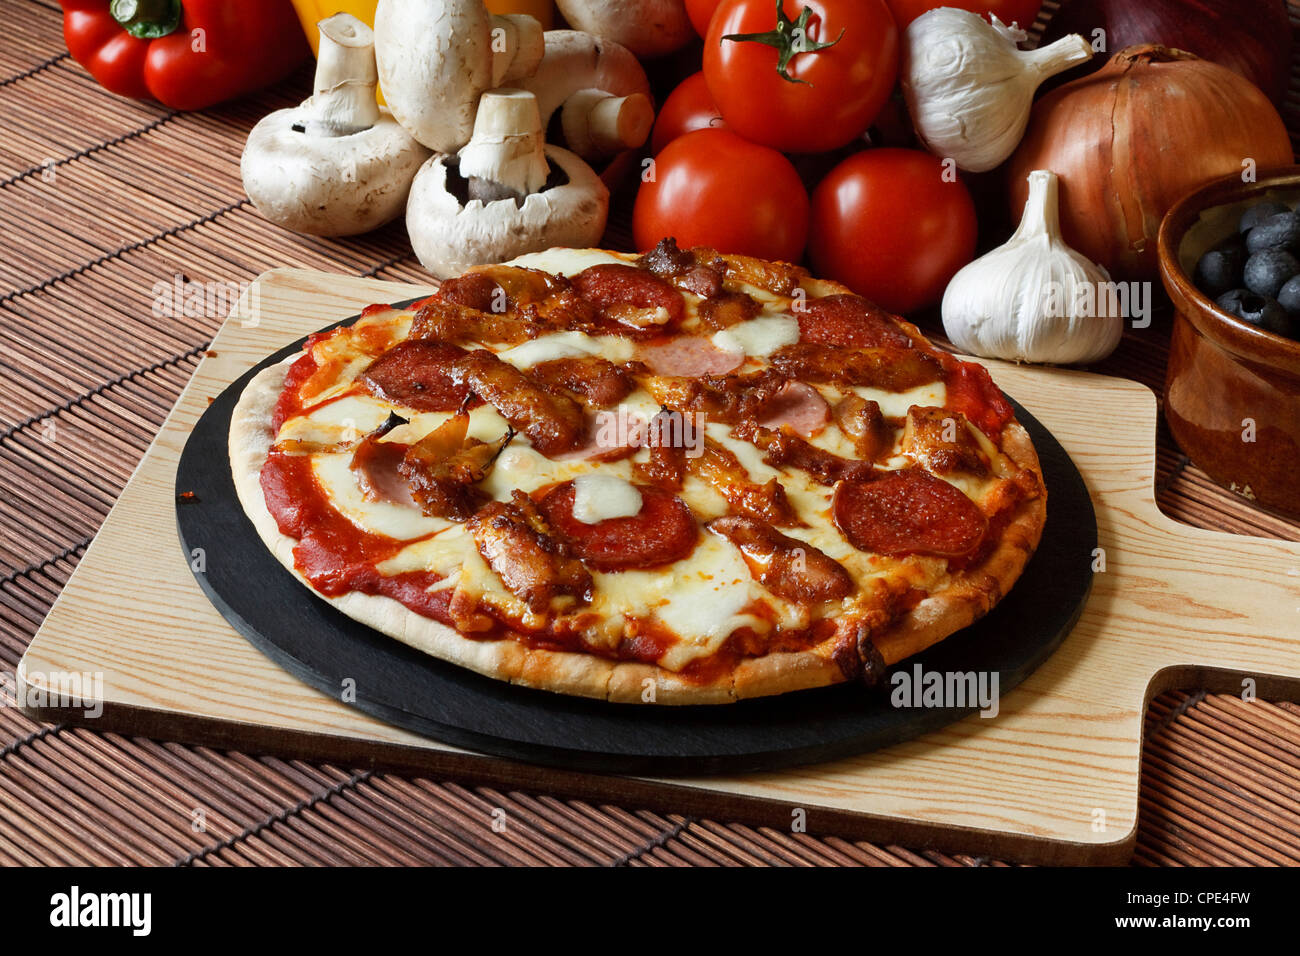 Barbecue or BBQ meat feast pizza with a topping of pepperoni, sausage, salami and chicken wings Stock Photo